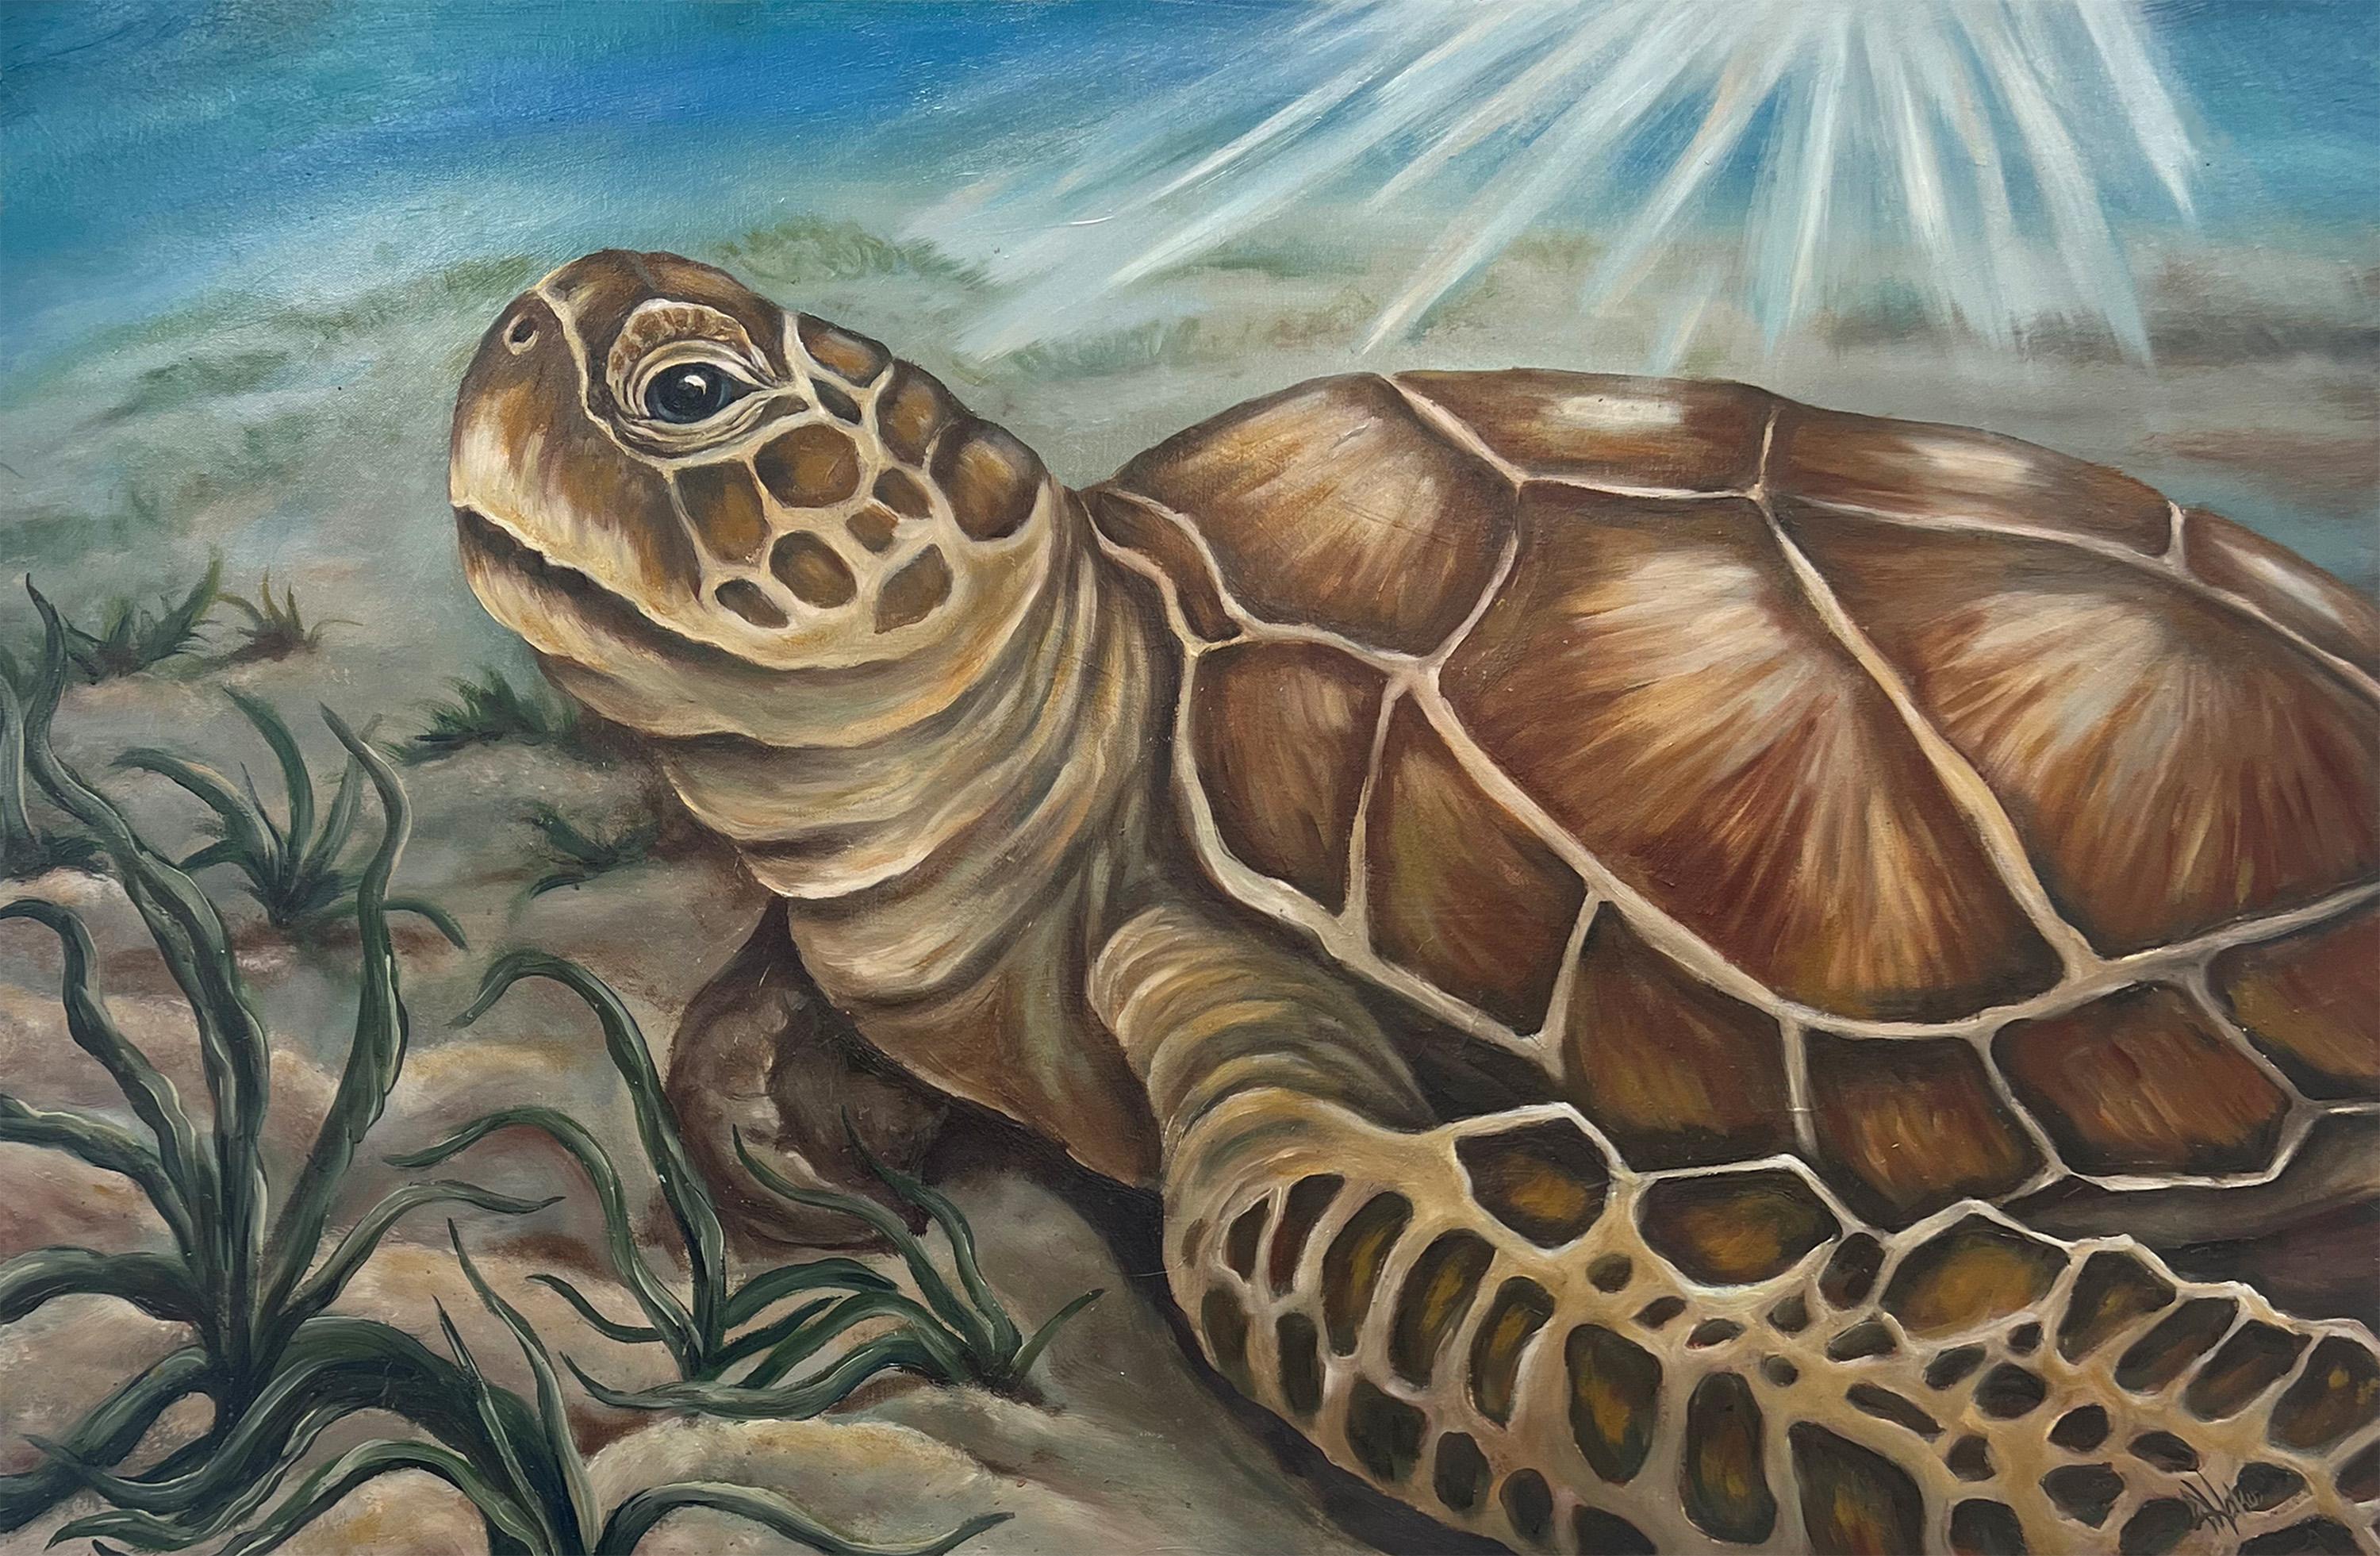 Just Chill, Sea Turtle, Oil Painting